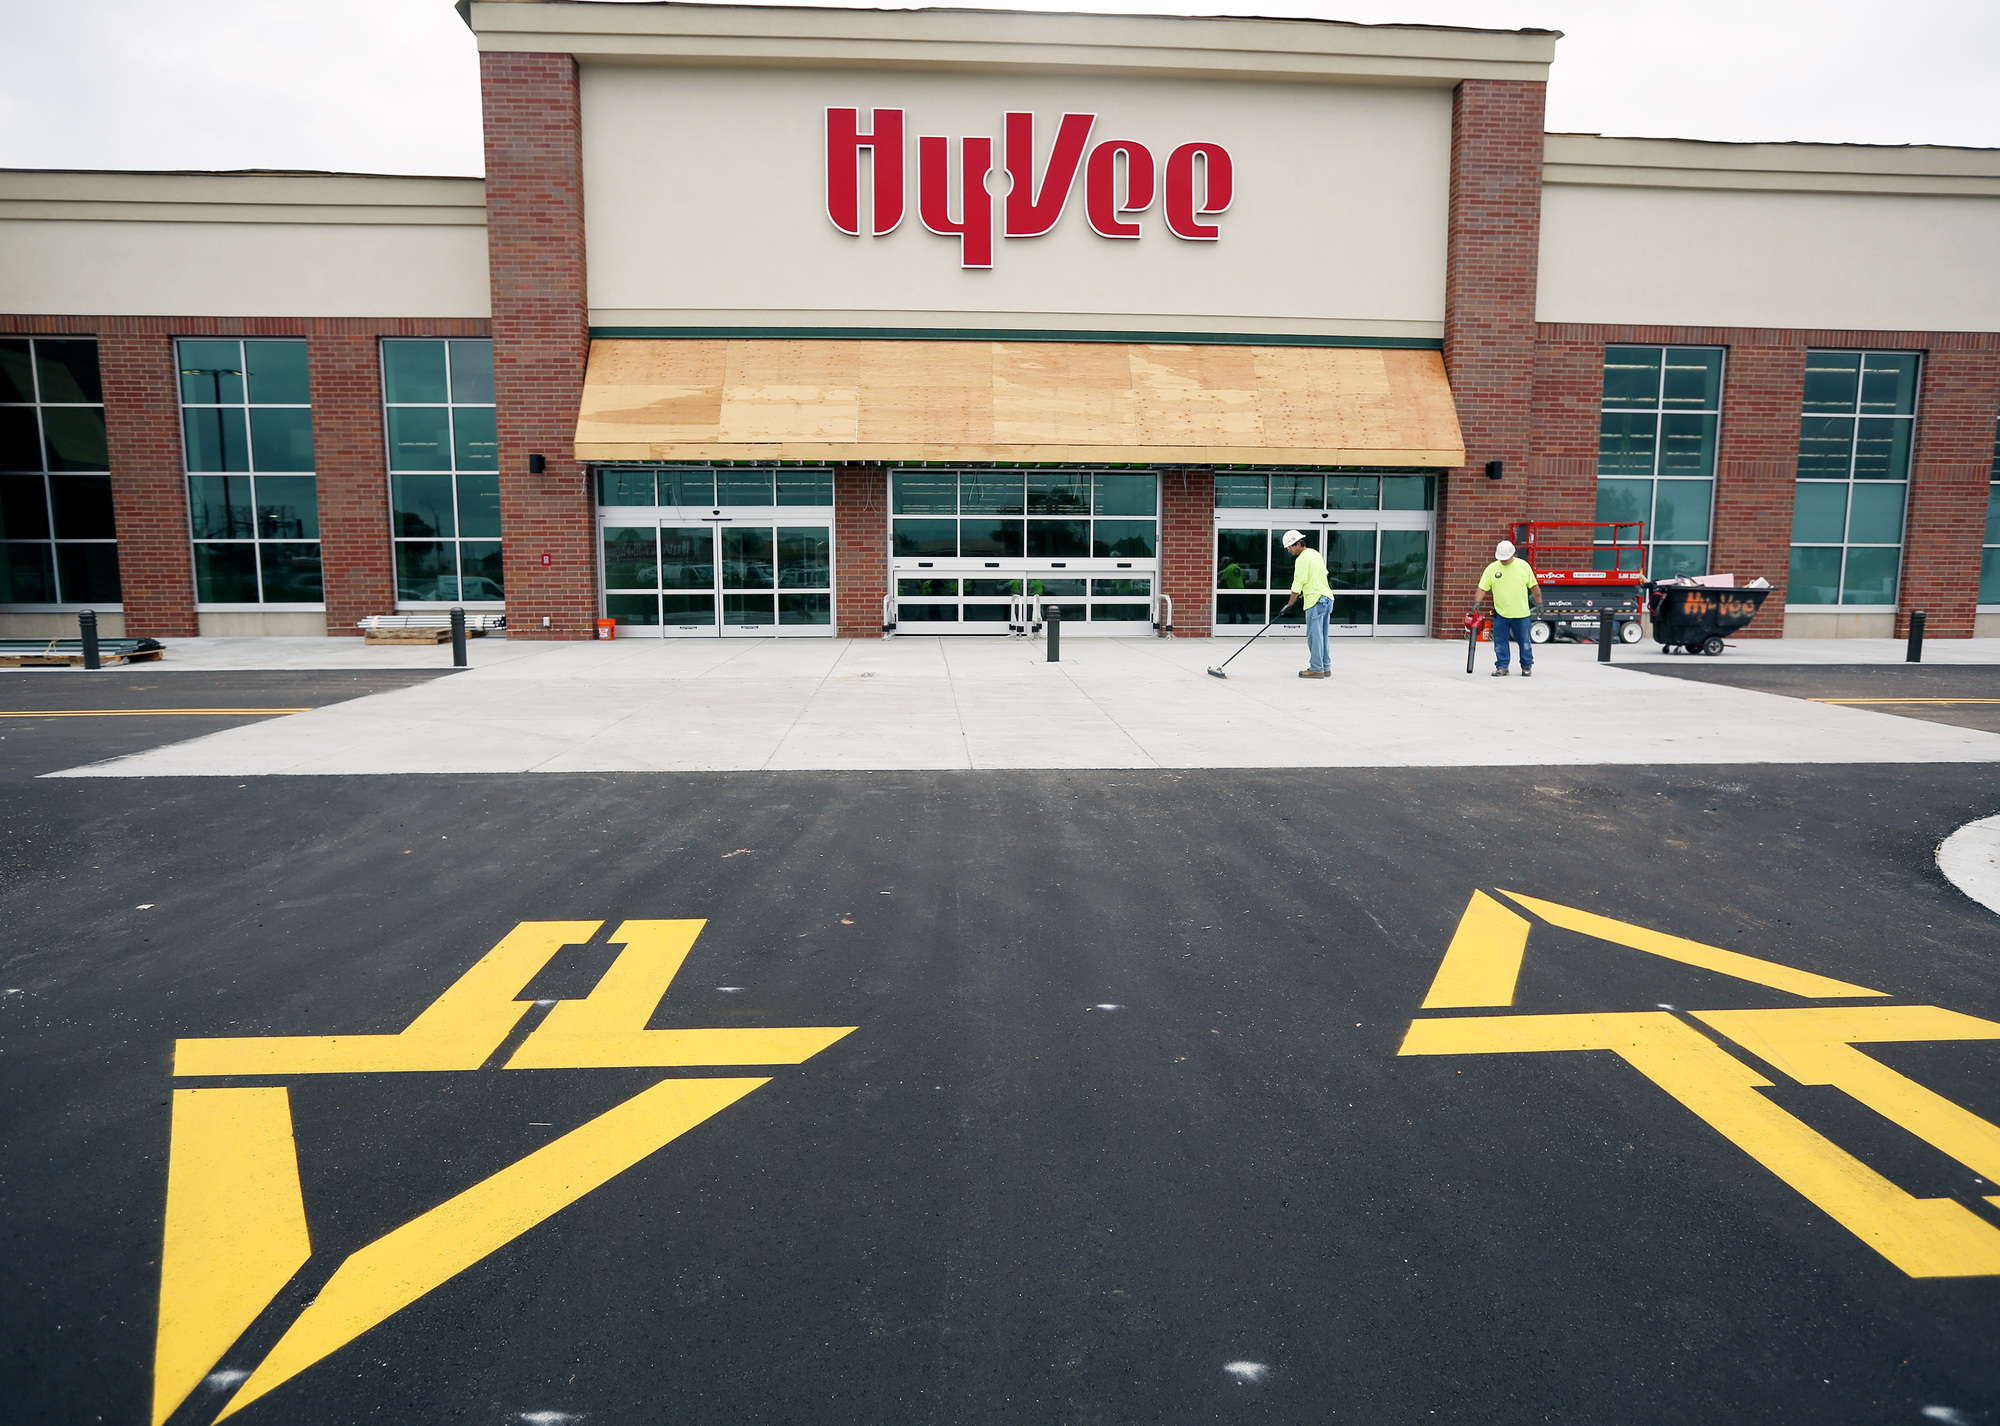 Hy-Vee has been expanding its' presence in the Twin Cities